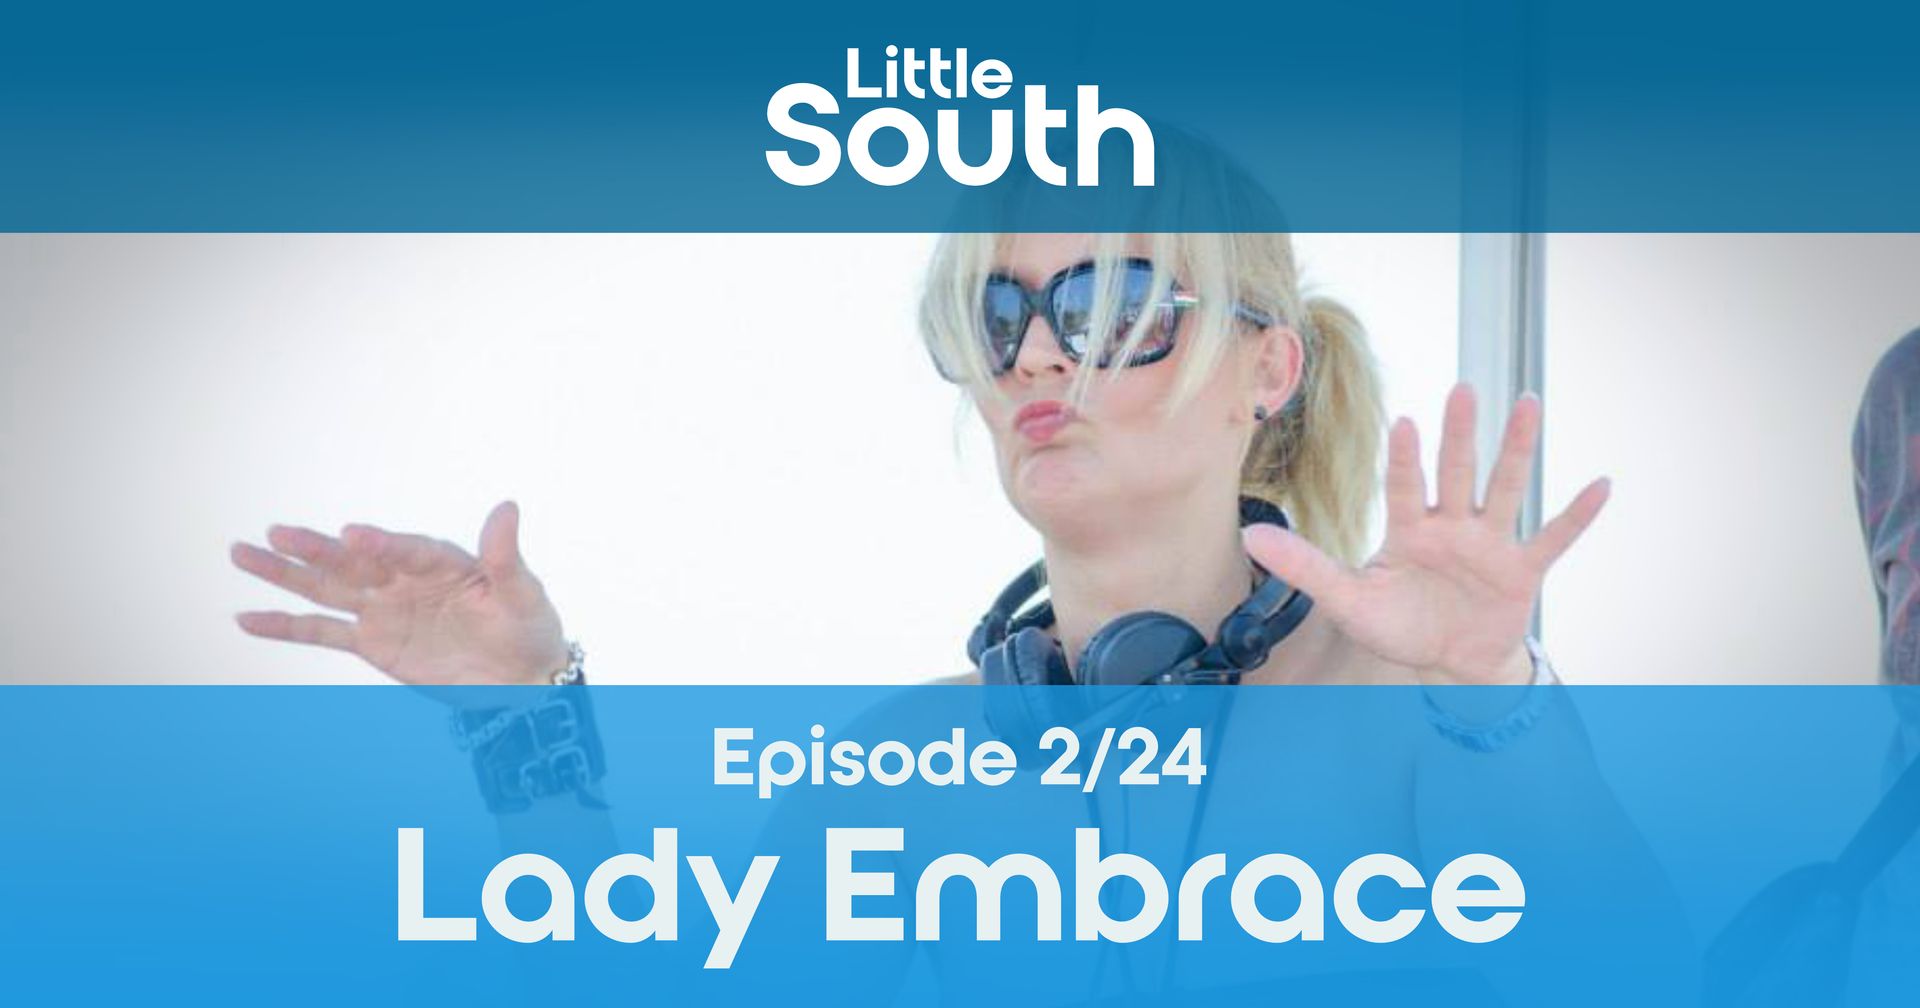 ste ellis is featured on episode 24/23 of little south